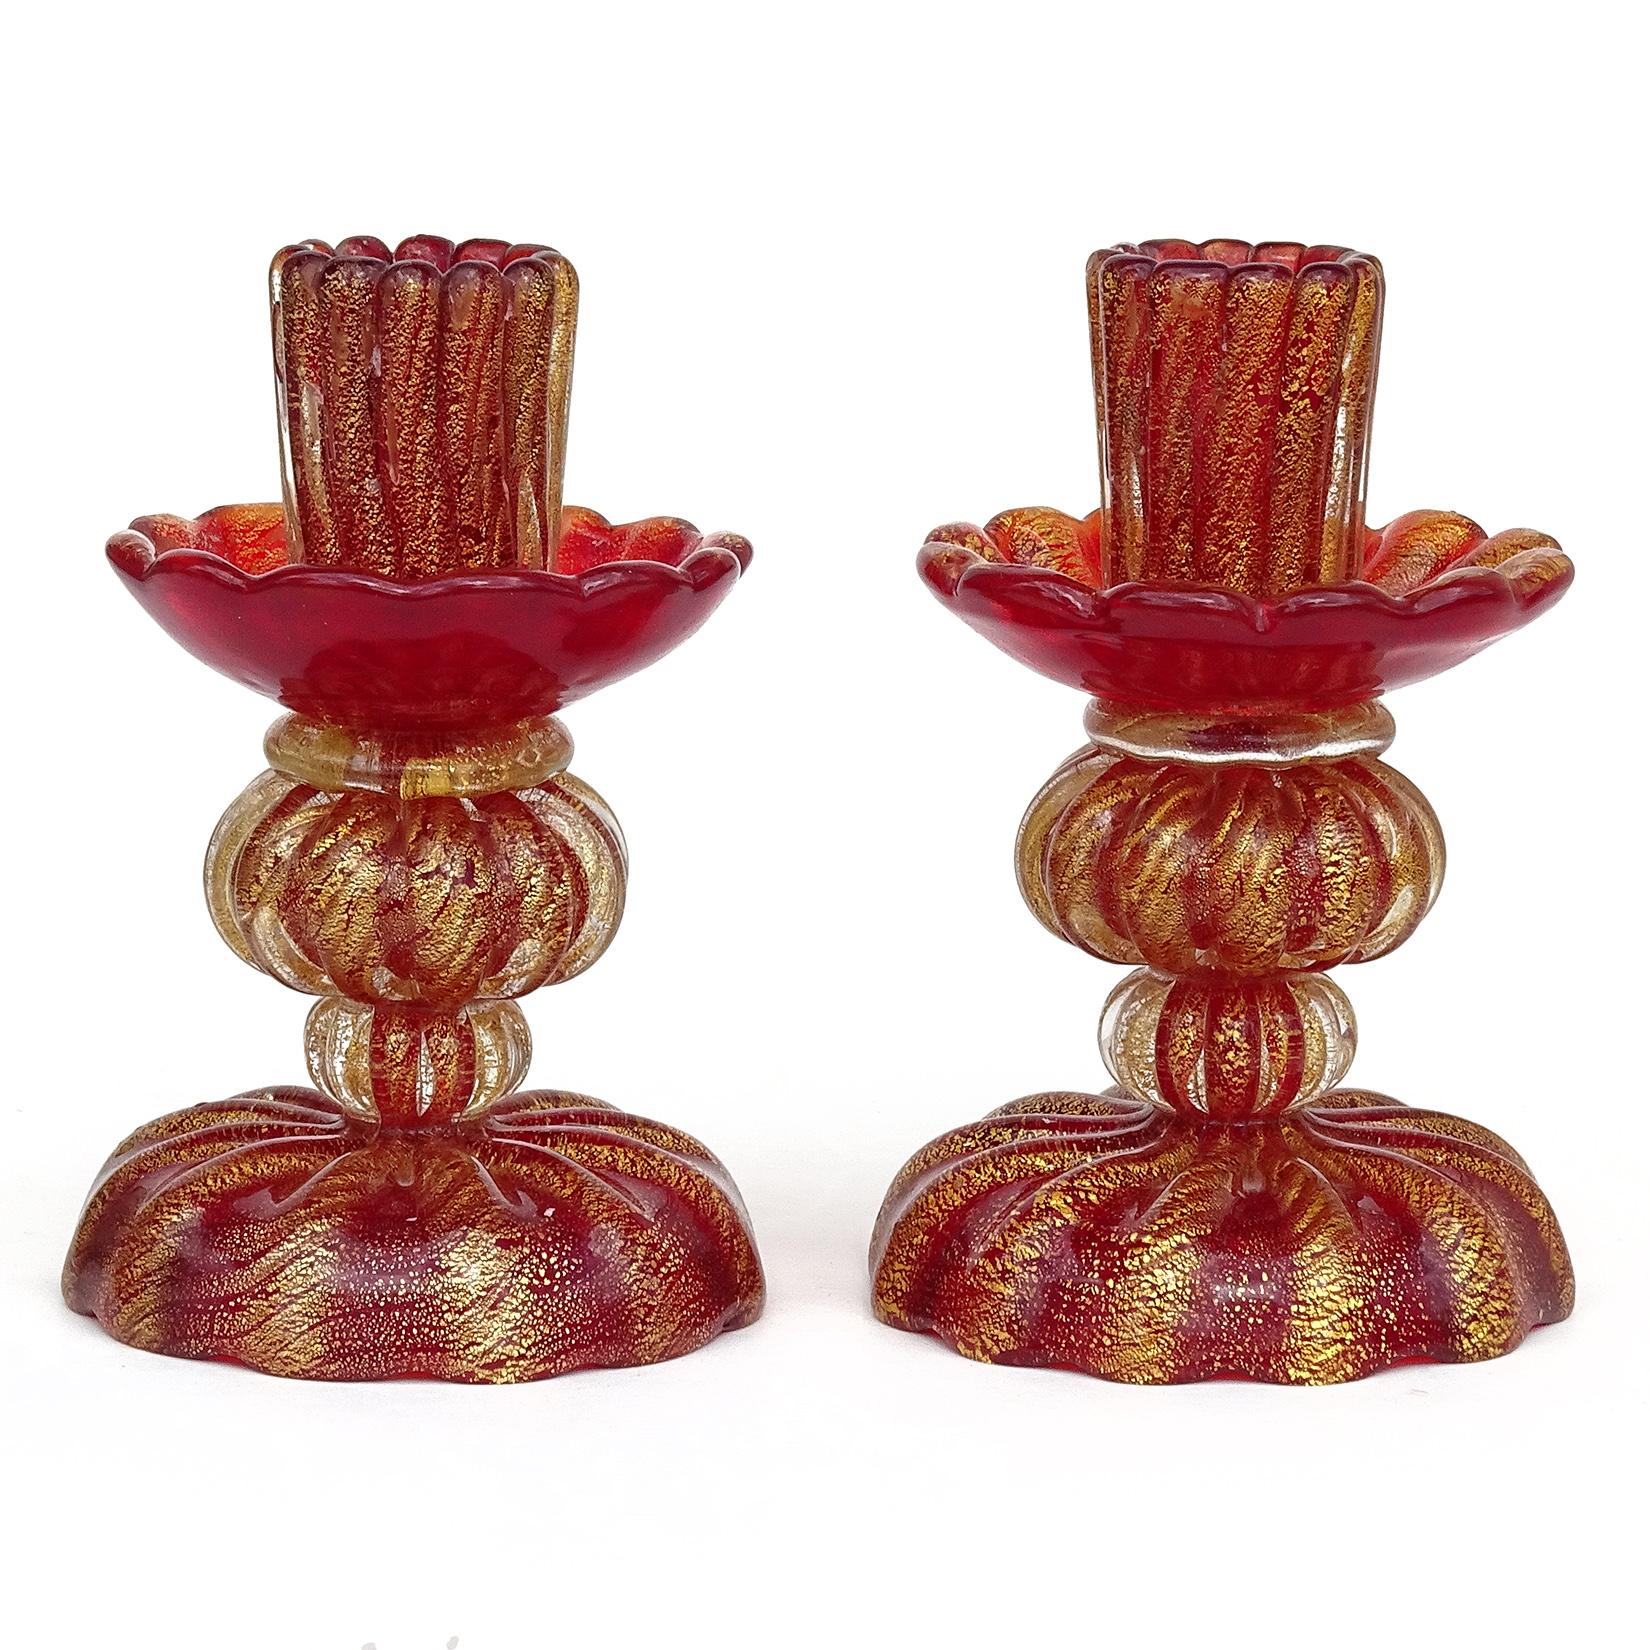 Beautiful vintage Murano hand blown deep red and gold flecks Italian art glass matching pair of candlesticks. Documented to designer Ercole Barovier, for Barovier e Toso. Both candle holders have the original 